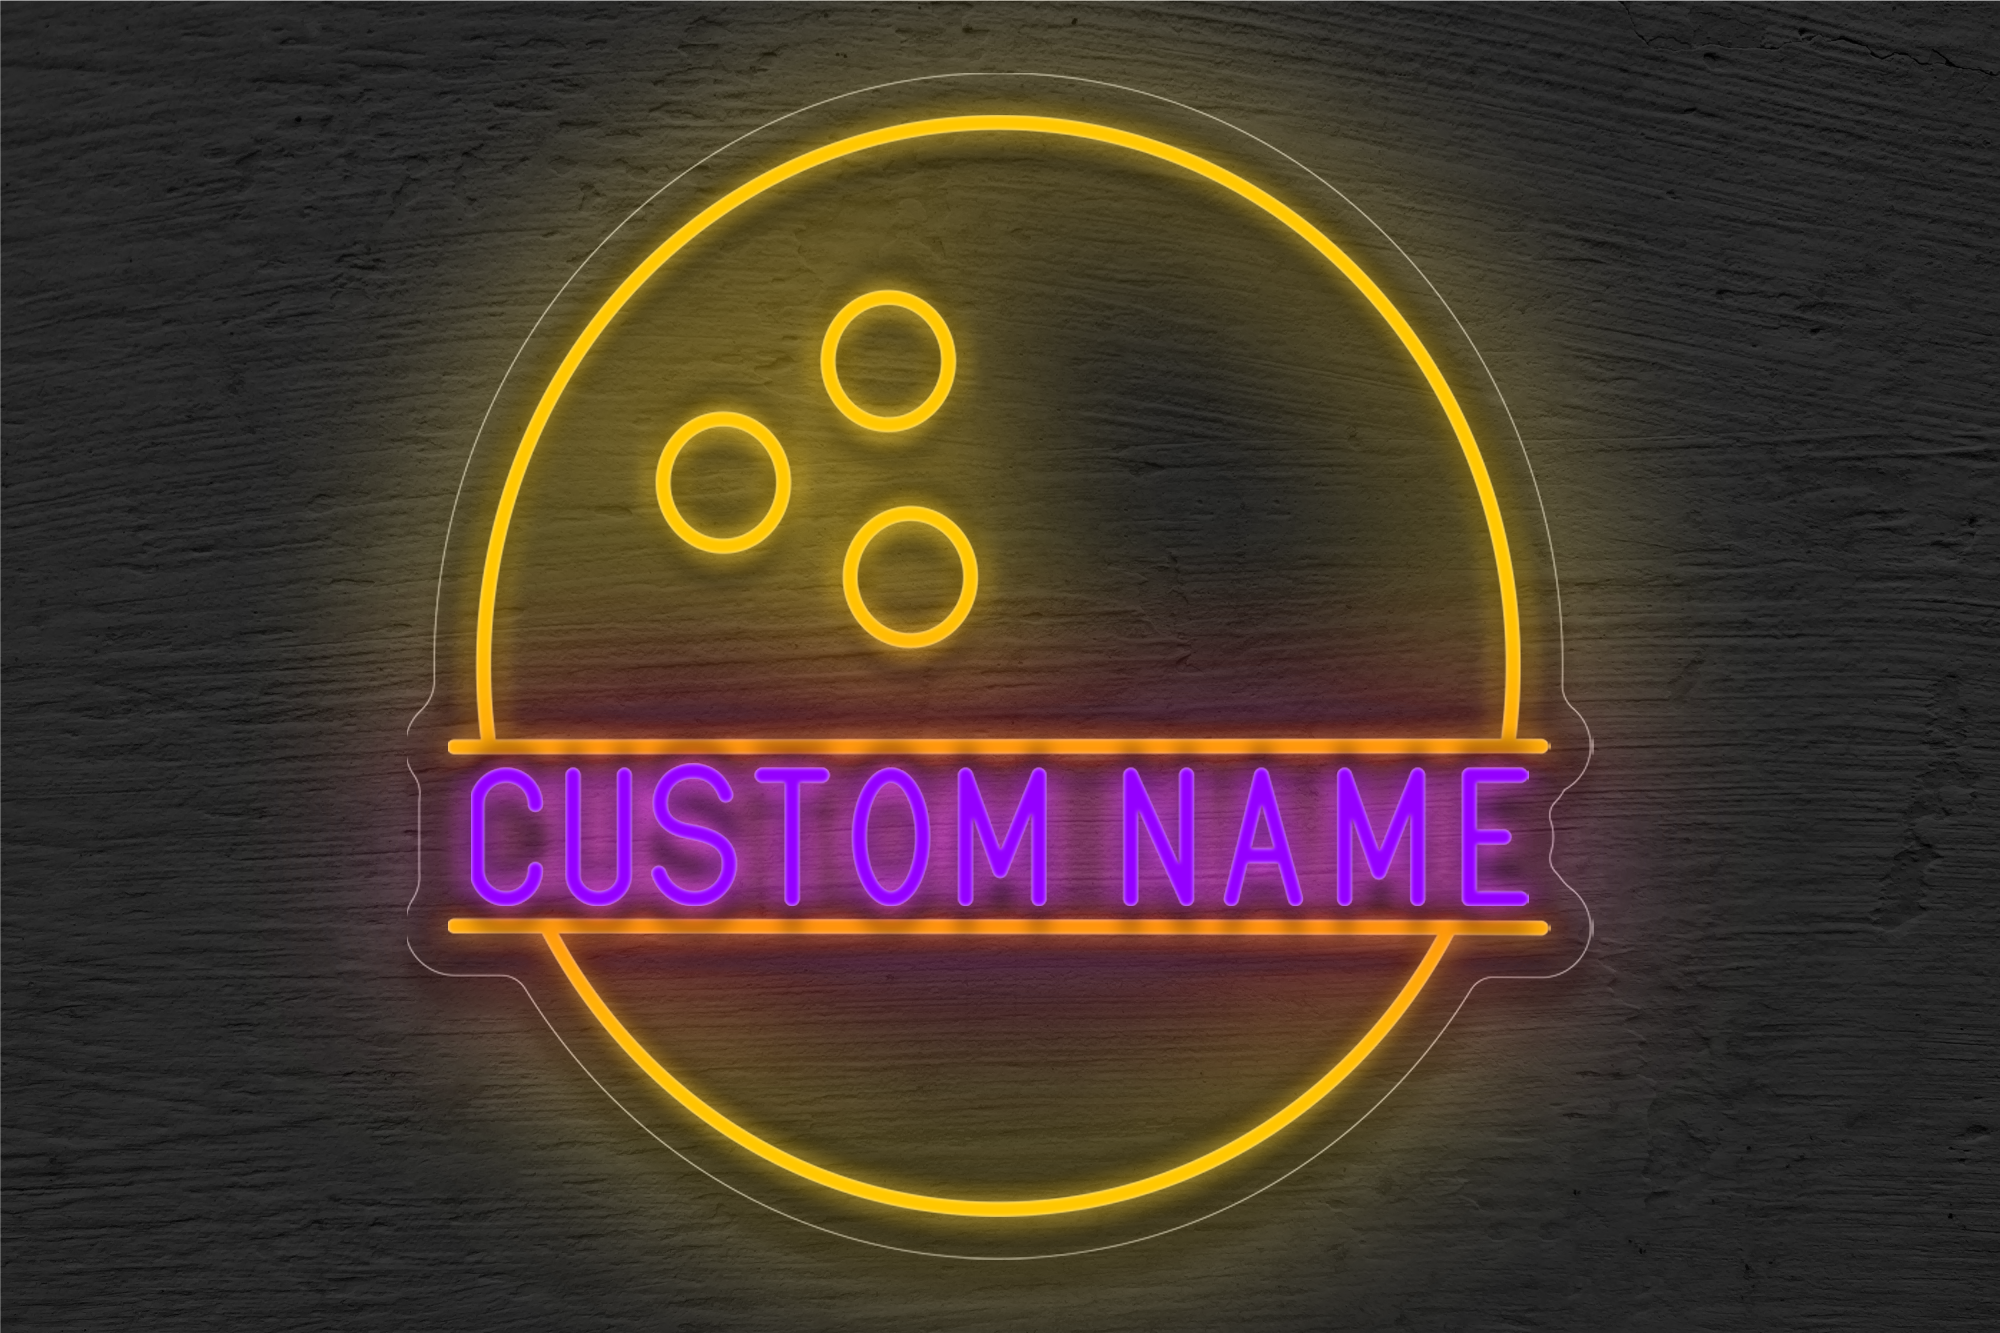 Custom Name in Bowling Ball LED Neon Sign